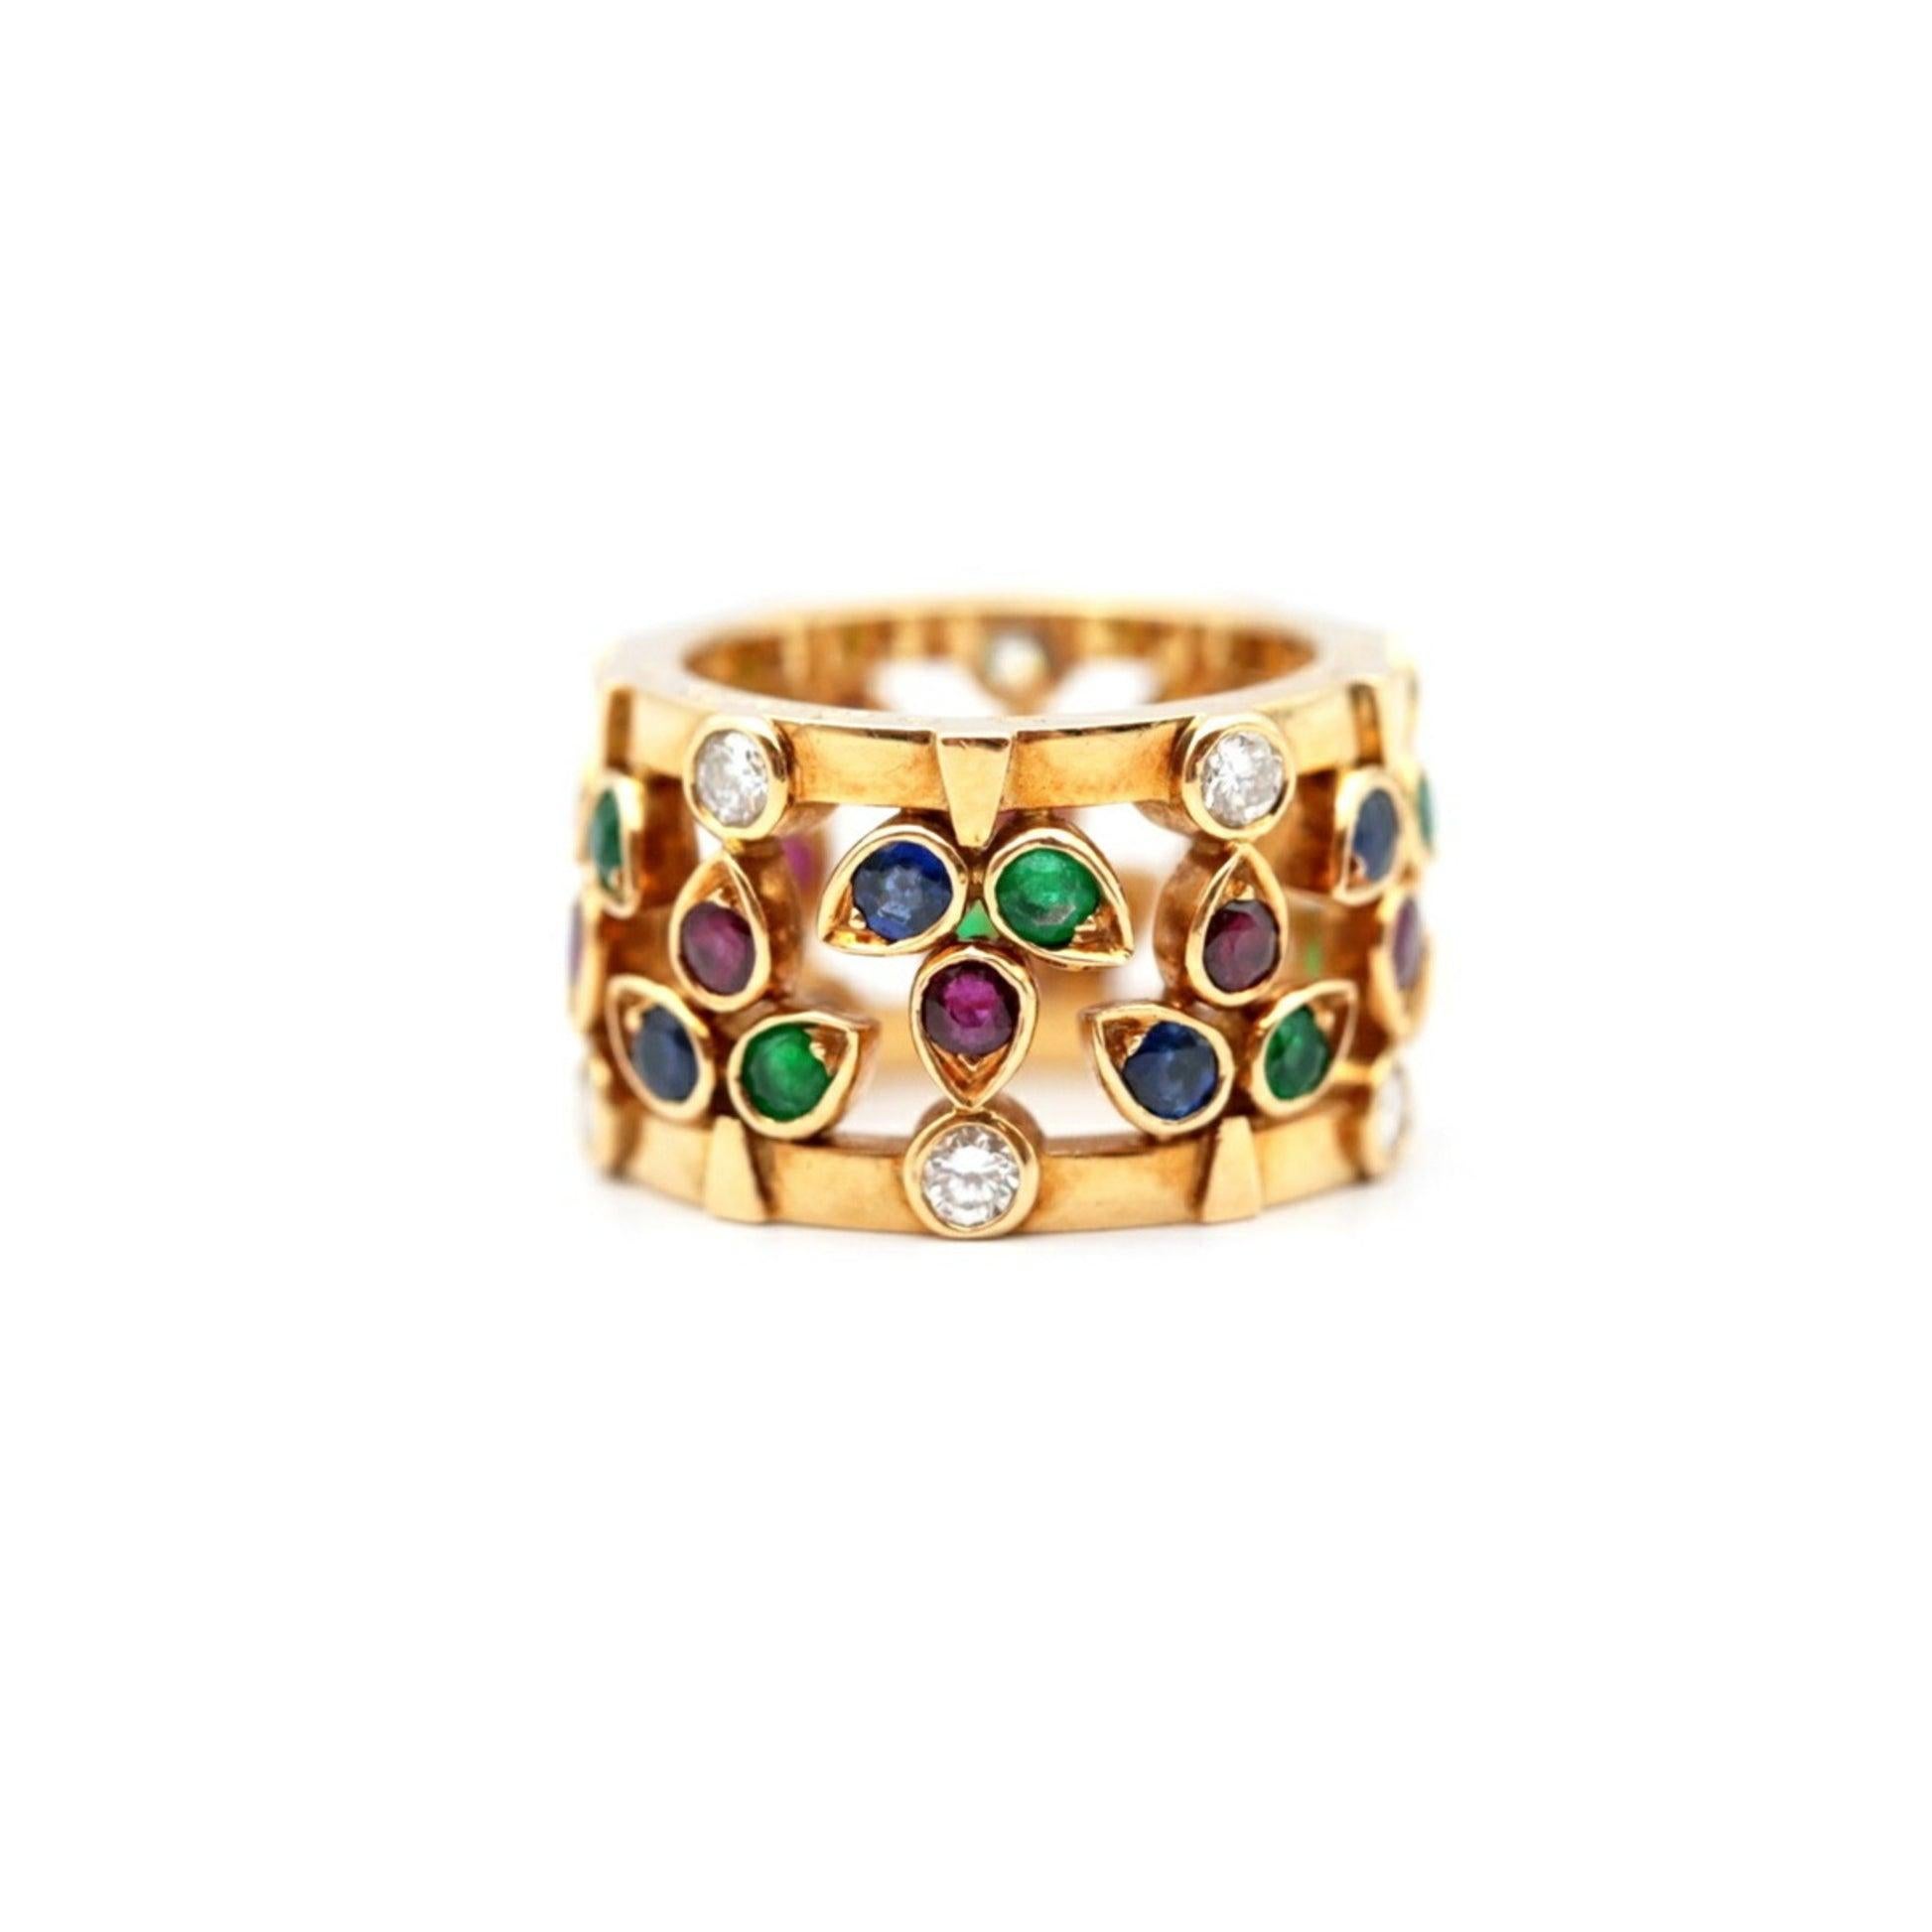 Women's Cartier Multicolor Diamond, Emerald, Ruby, Sapphire Ring in 18K Yellow Gold For Sale